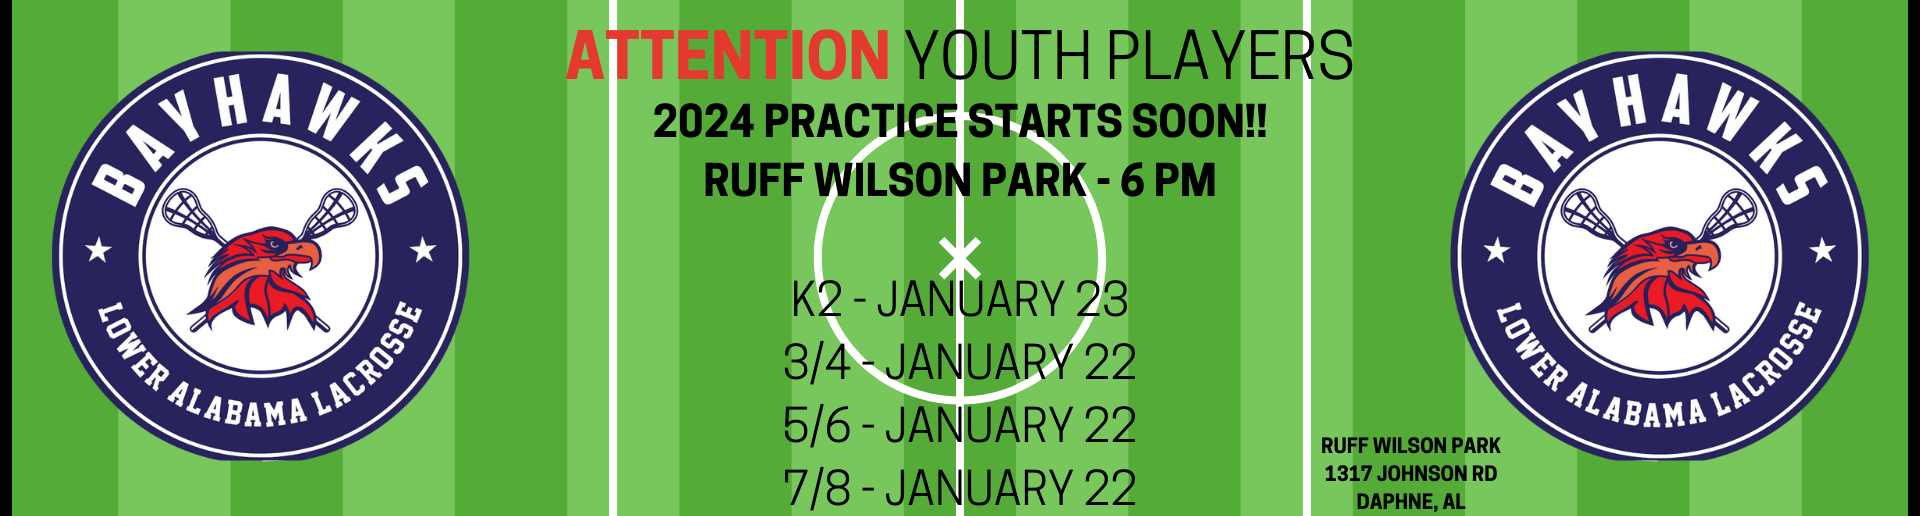 YOUTH PRACTICE STARTS SOON!